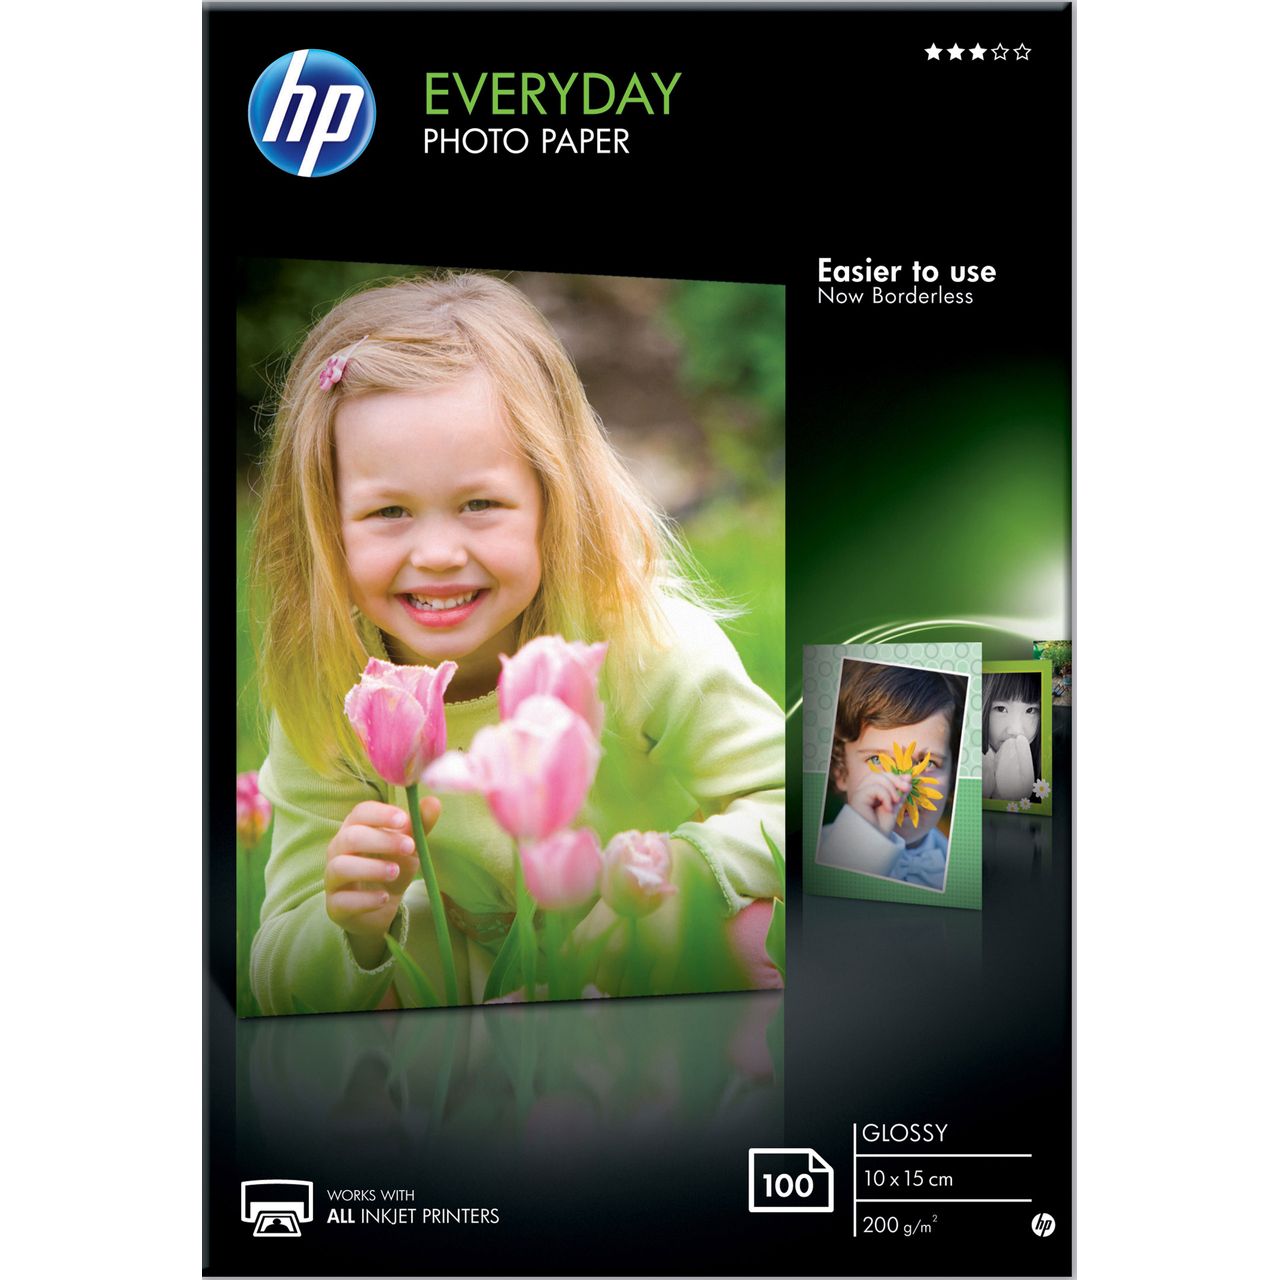 HP Everyday Glossy Photo Paper-100 sht/10 x 15 cm Review